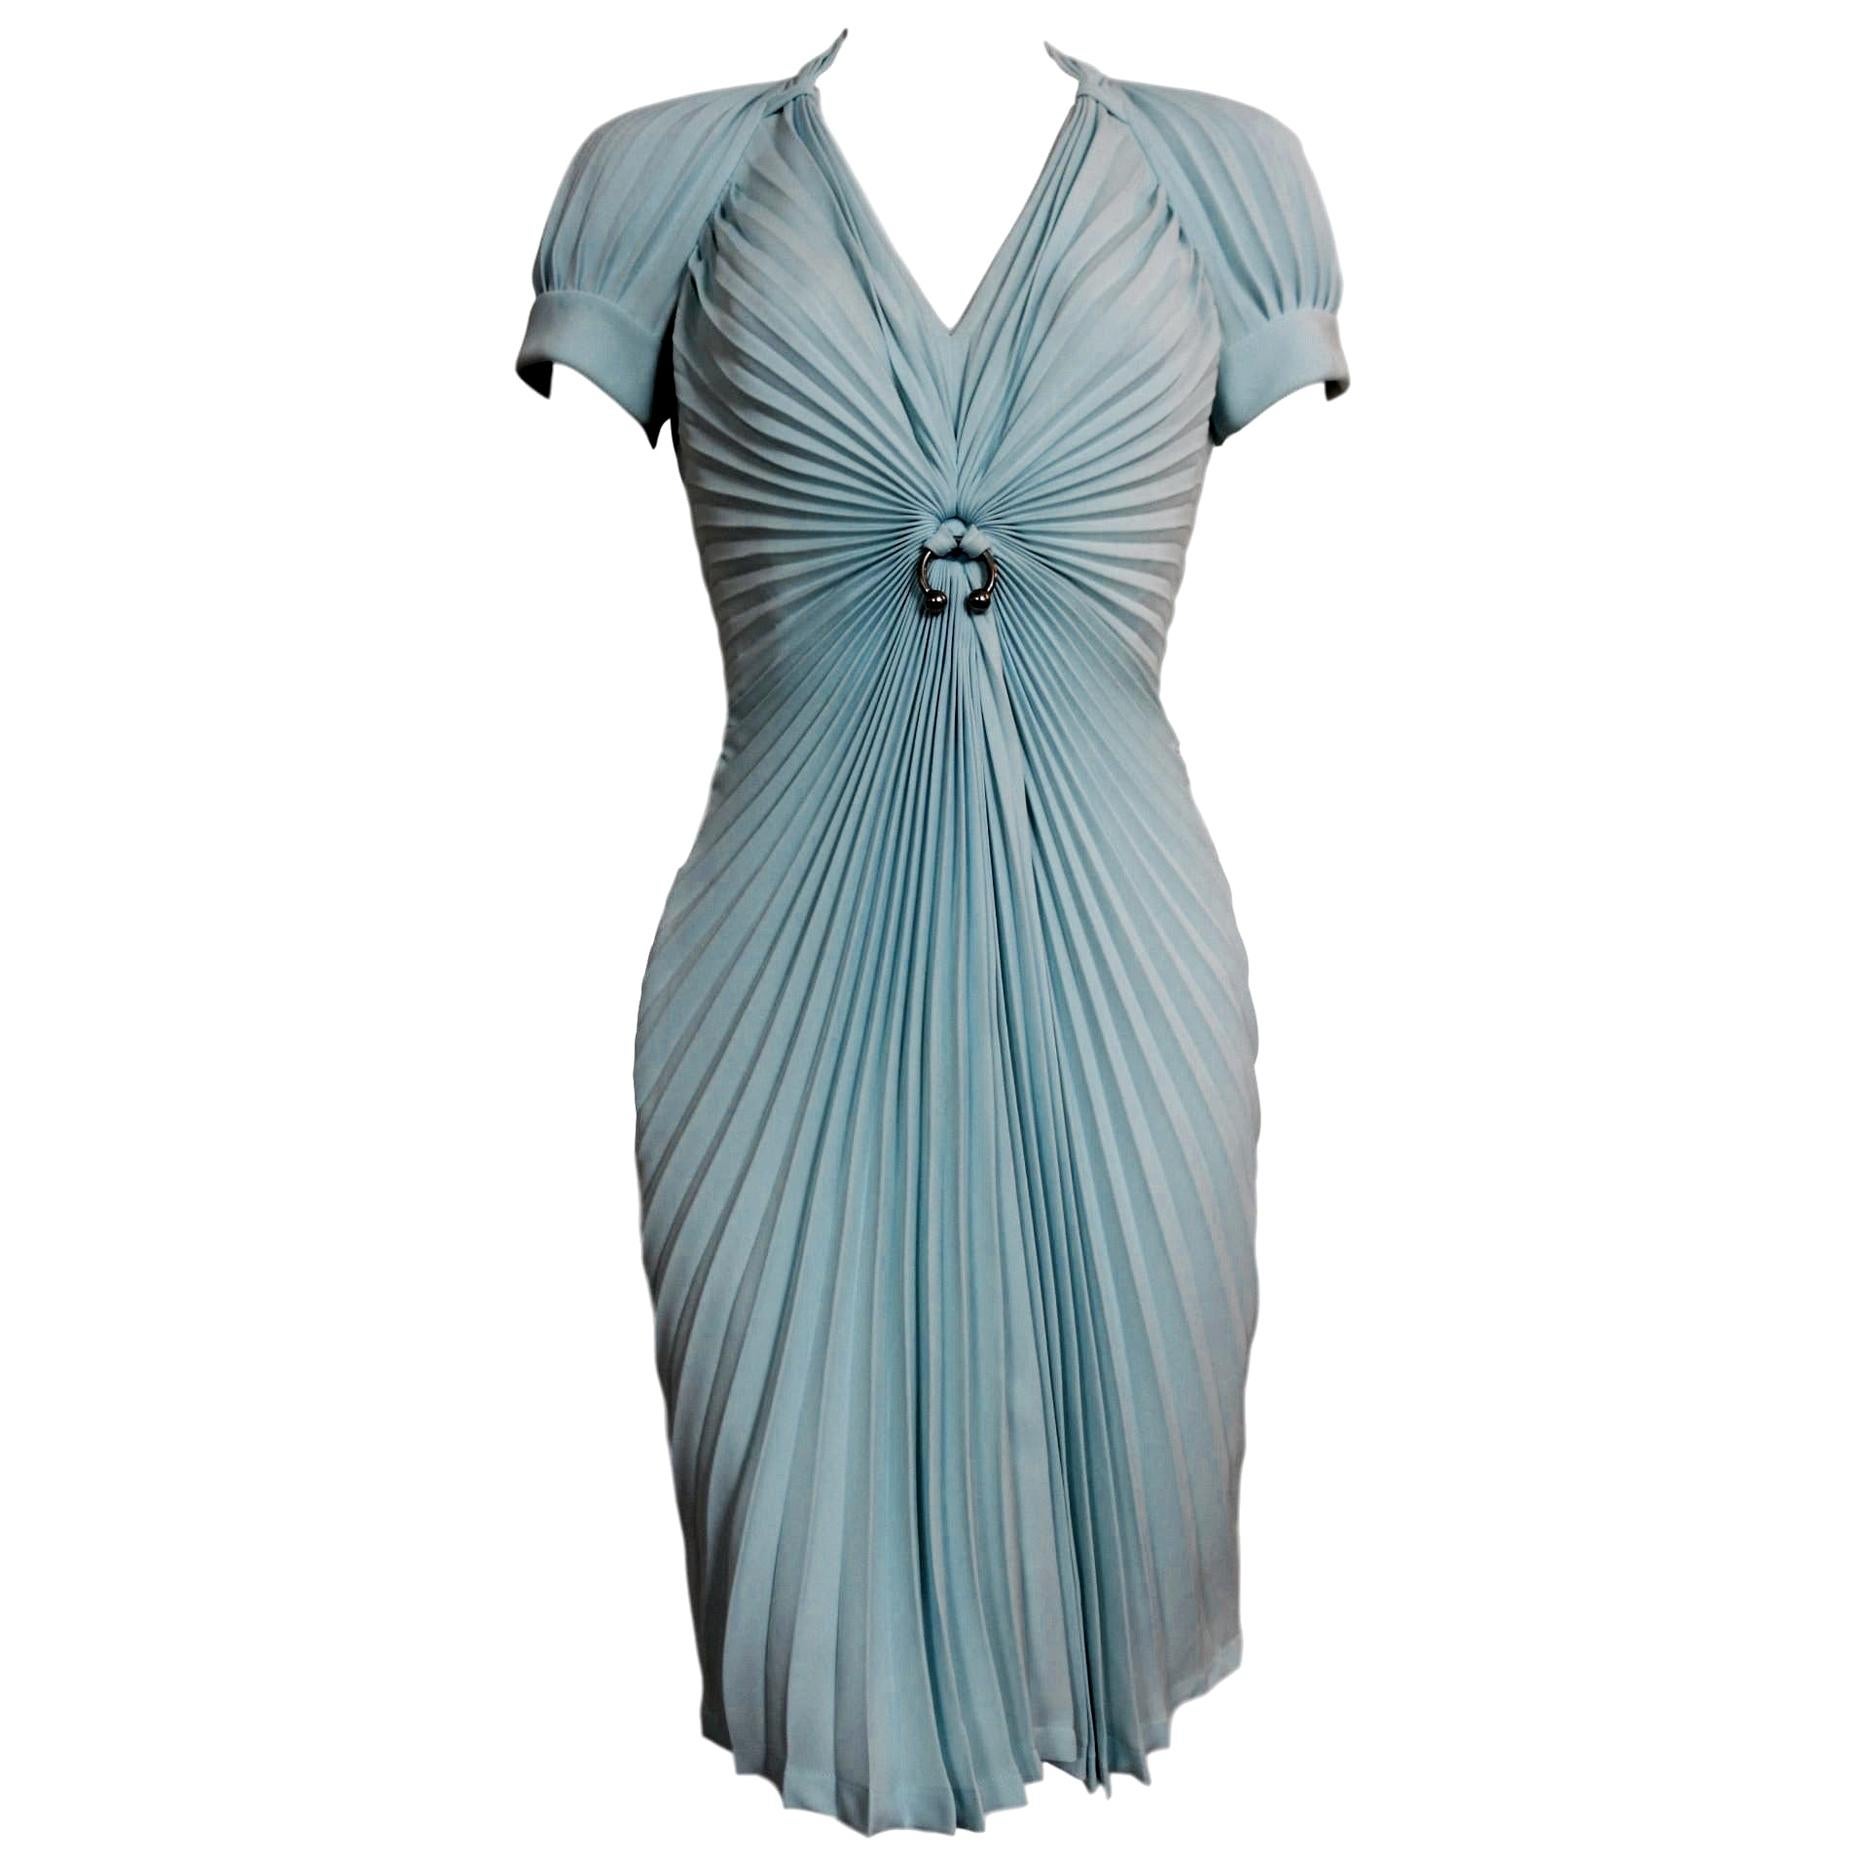 Thierry Mugler Starburst Pleated Dress For Sale